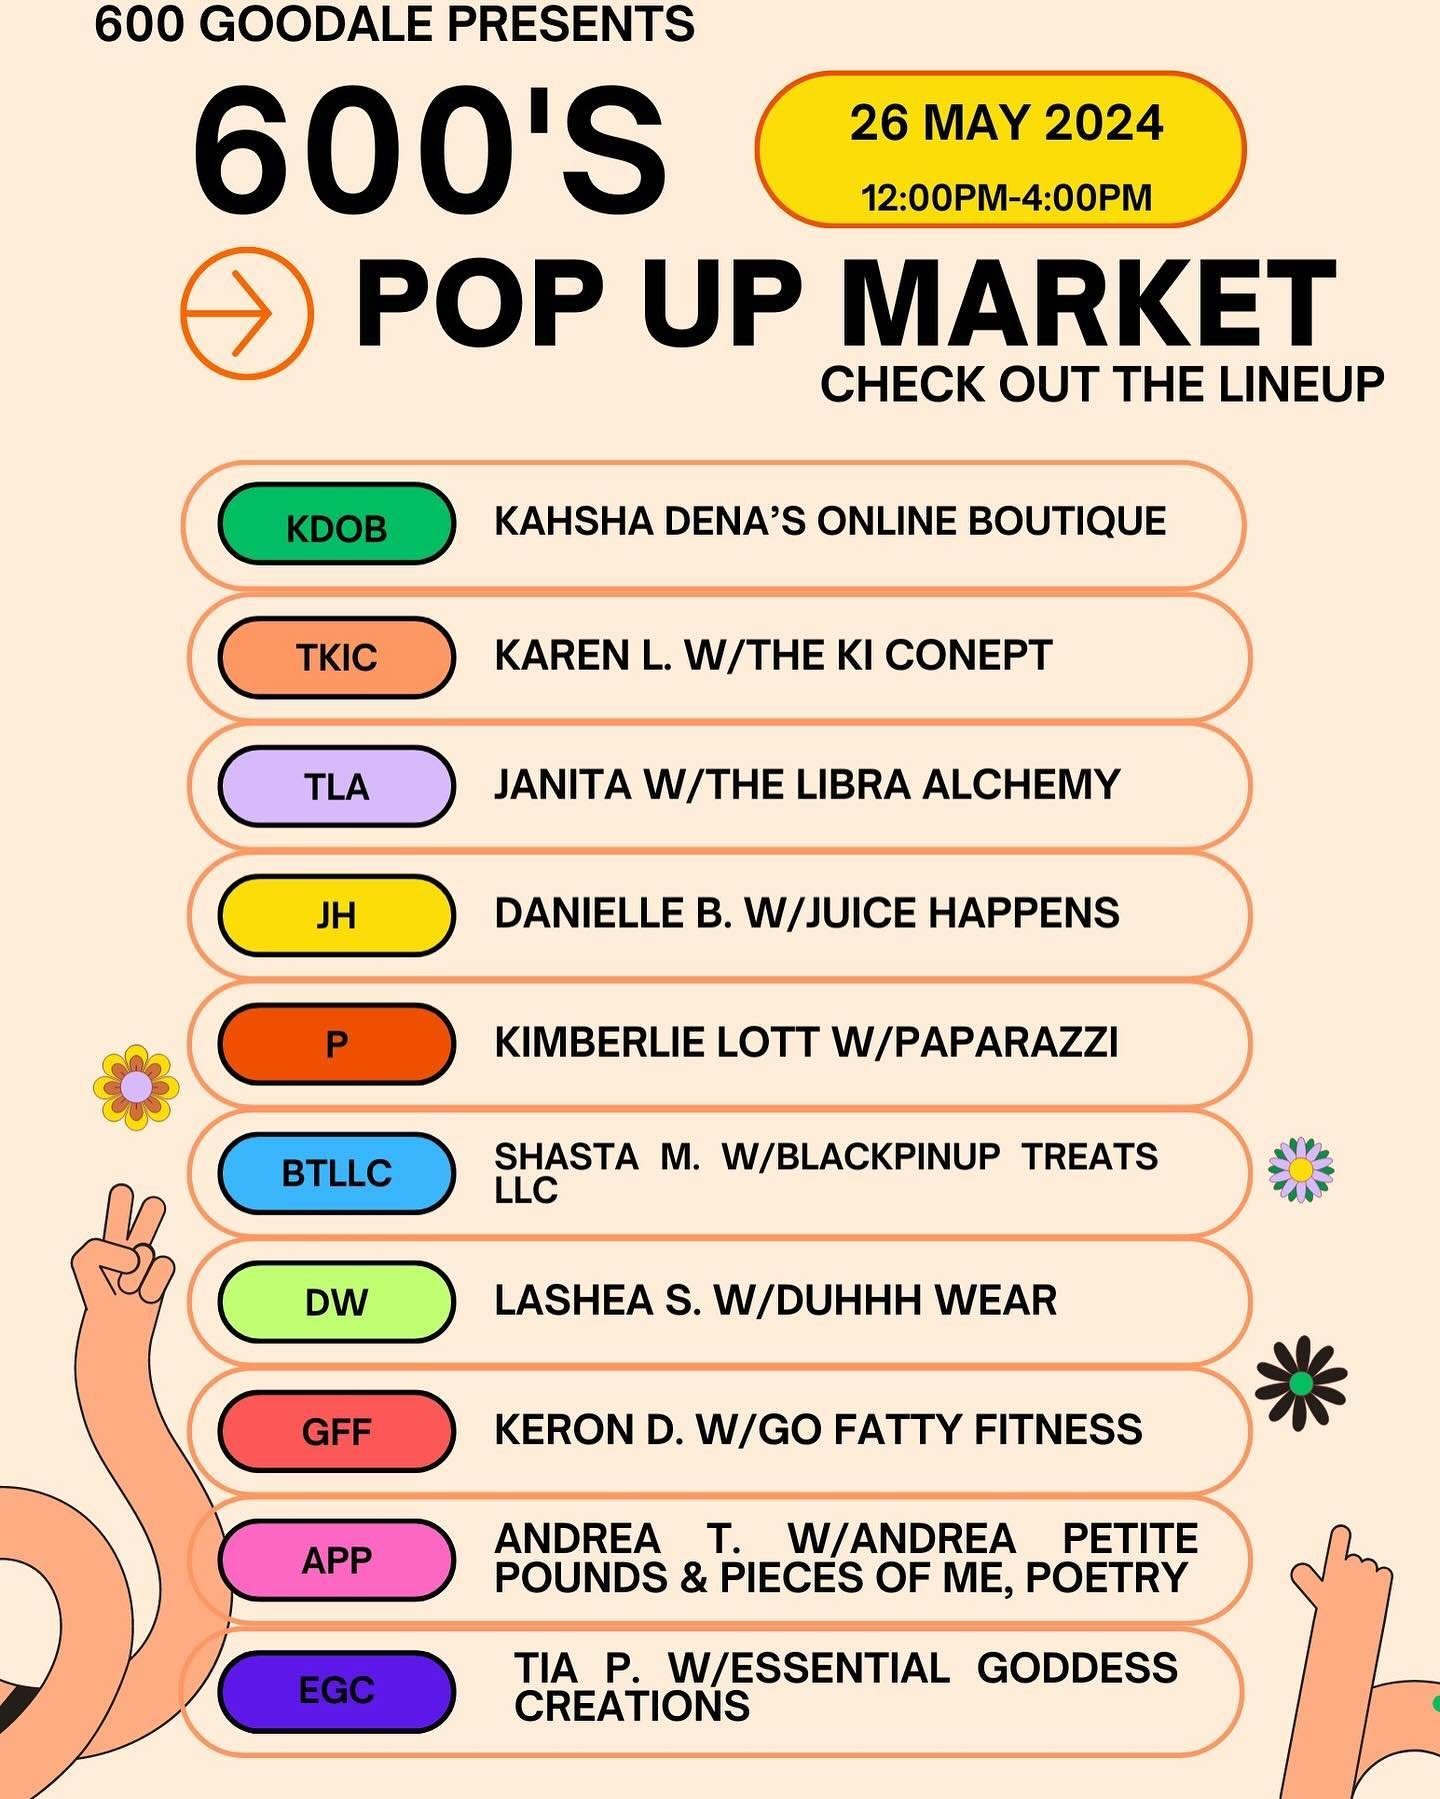 Hey Hey!! Here is the line up!! A lot of great local businesses that will need your support at the end of May!! Looking forward to seeing all of you and seeing what you&rsquo;ll get!! #600Goodale #PopUpMarket #May26